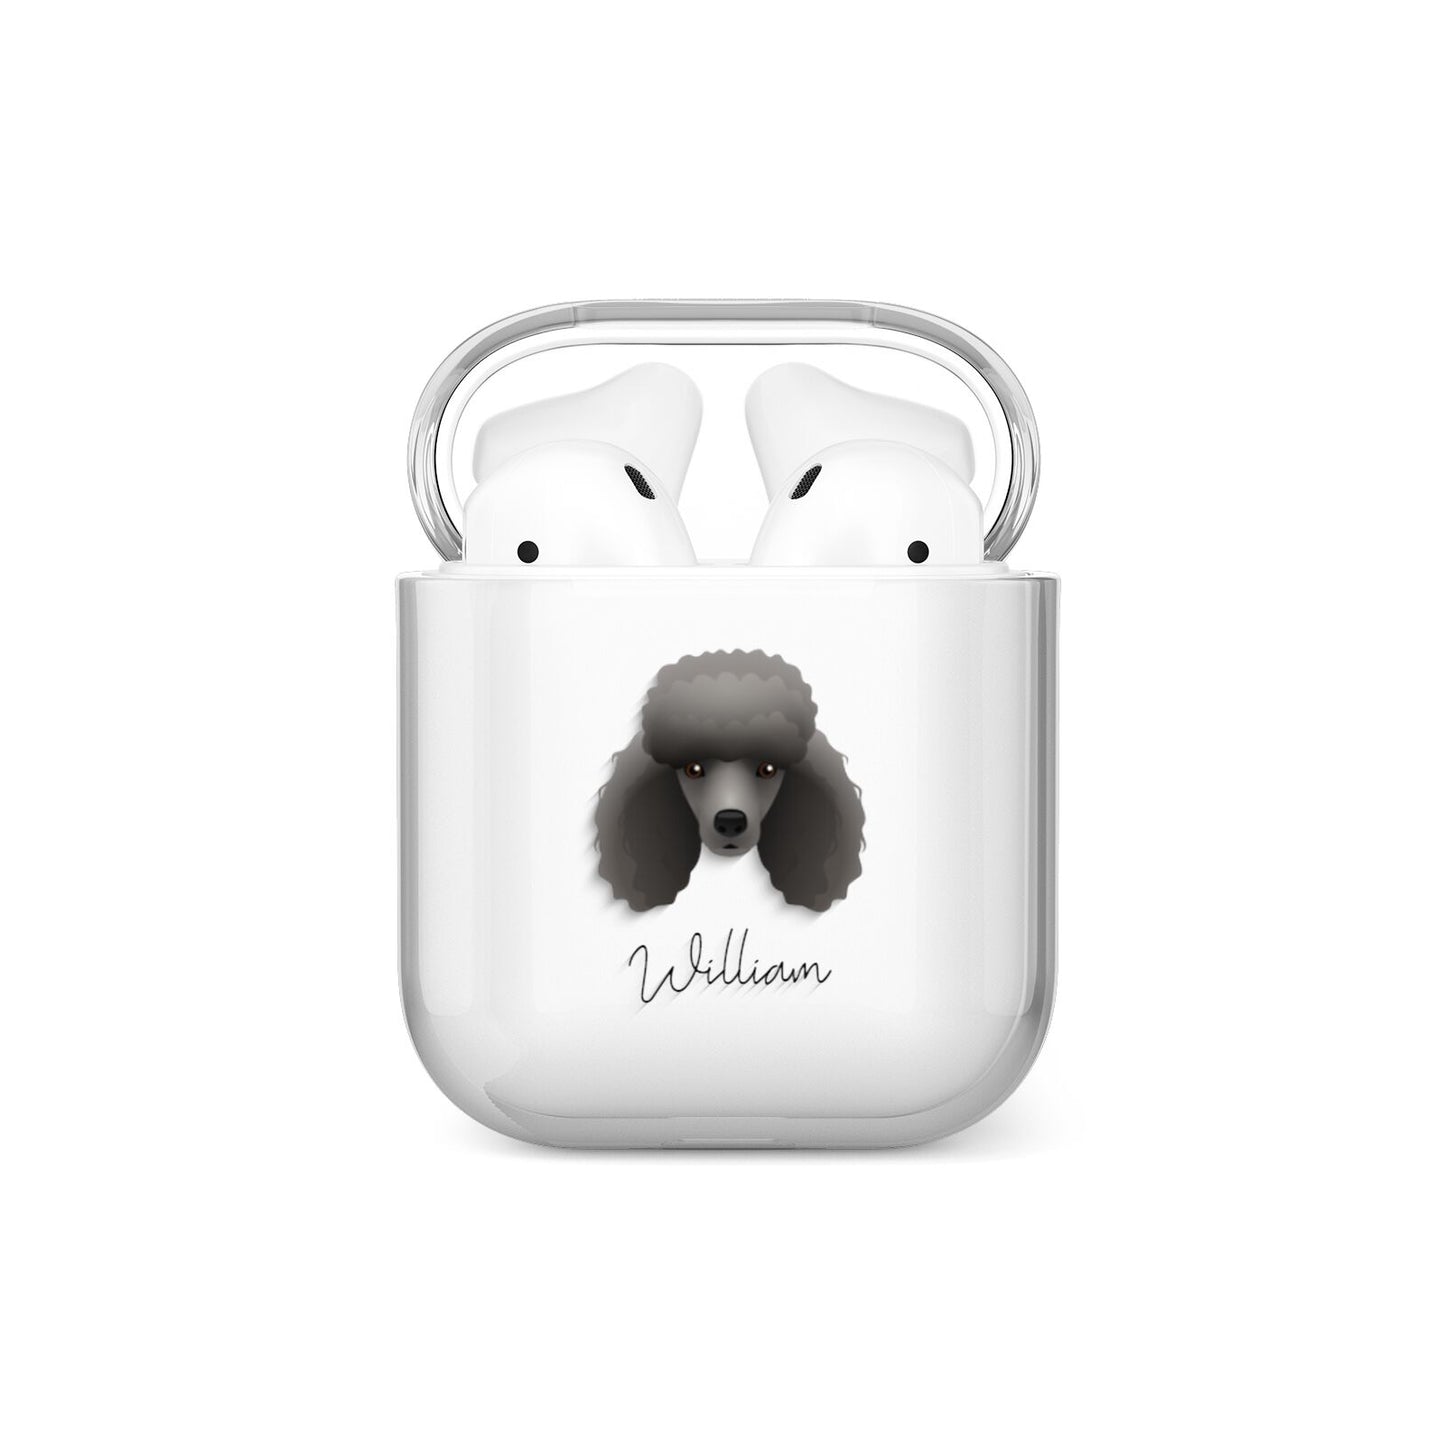 Miniature Poodle Personalised AirPods Case